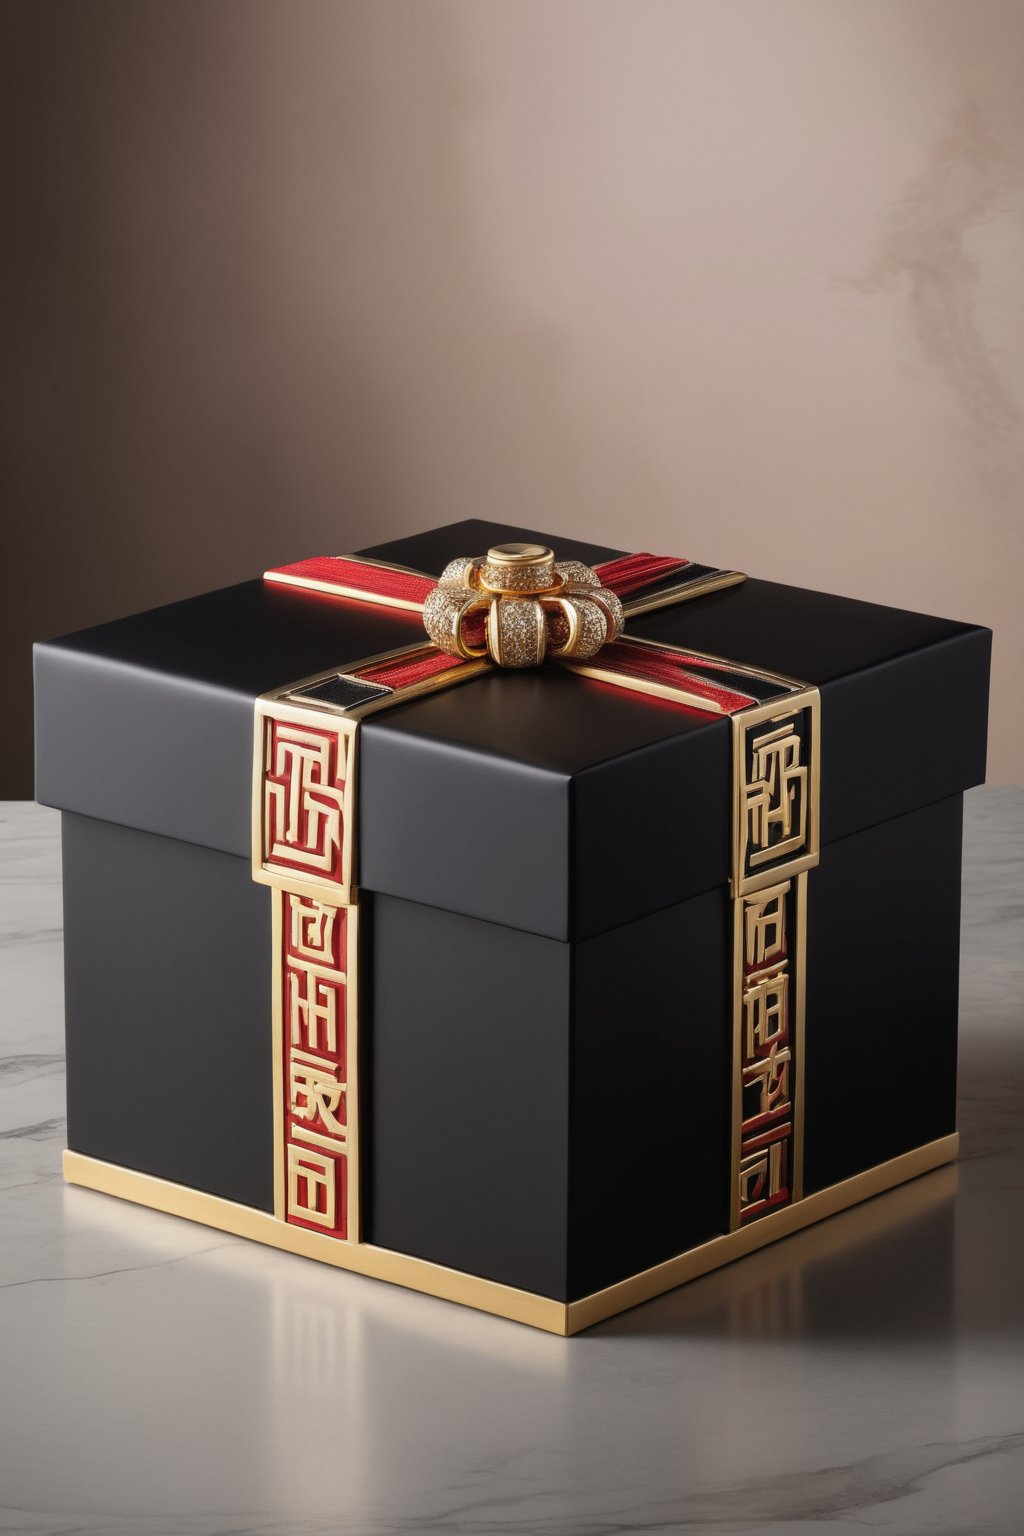 A majestic black gift box adorned with antique flair, in its surface is written "TA 1Y" in shimmering golden letters. A striking red topknot adorns the lid, adding a pop of vibrant color to the overall design. The box itself is crafted with meticulous attention to detail, showcasing a hyper-realistic finish that invites tactile exploration. Against a dark background, the box's intricate details and rich textures leap forth in high-definition glory over a modern table, soft light from above